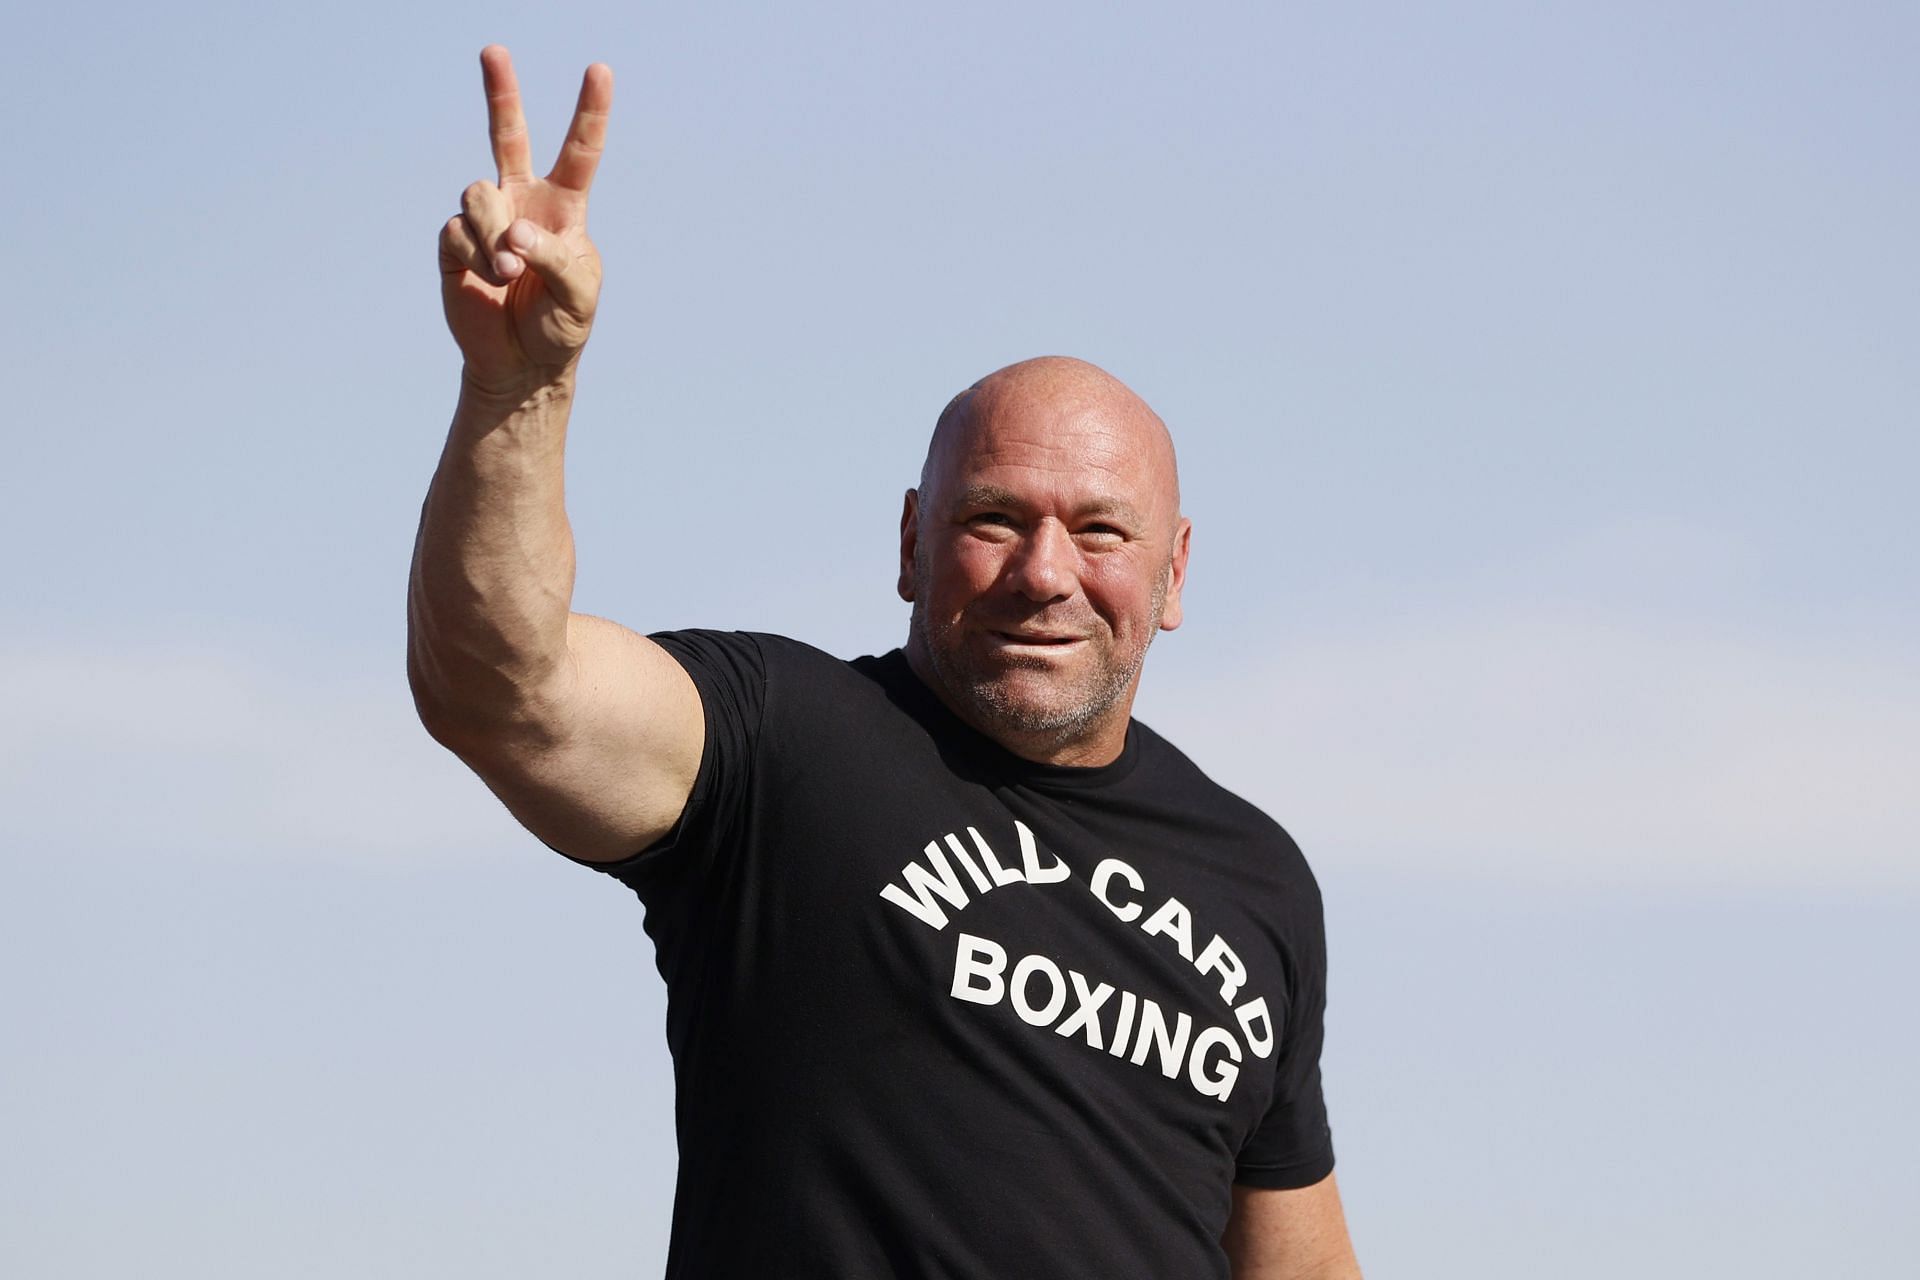 Dana White does not agree with vaccine mandates. 